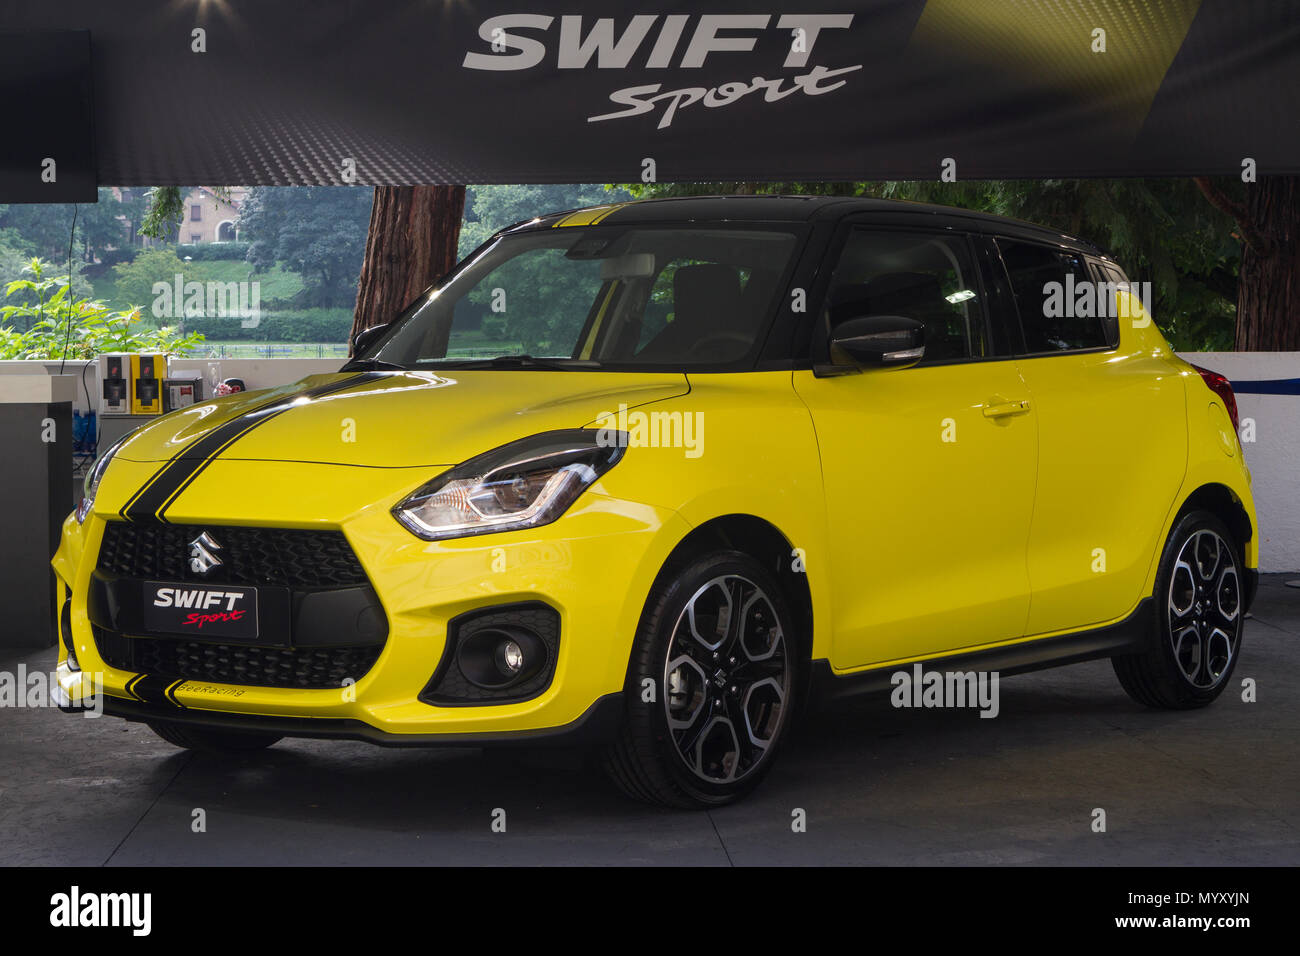 Turin, Italy. 07th June, 2018. Suzuki logo on a Suzuki Swift Sport. 2018  edition of Parco Valentino car show hosts cars by many automobile  manufacturers and car designers inside Valentino Park in